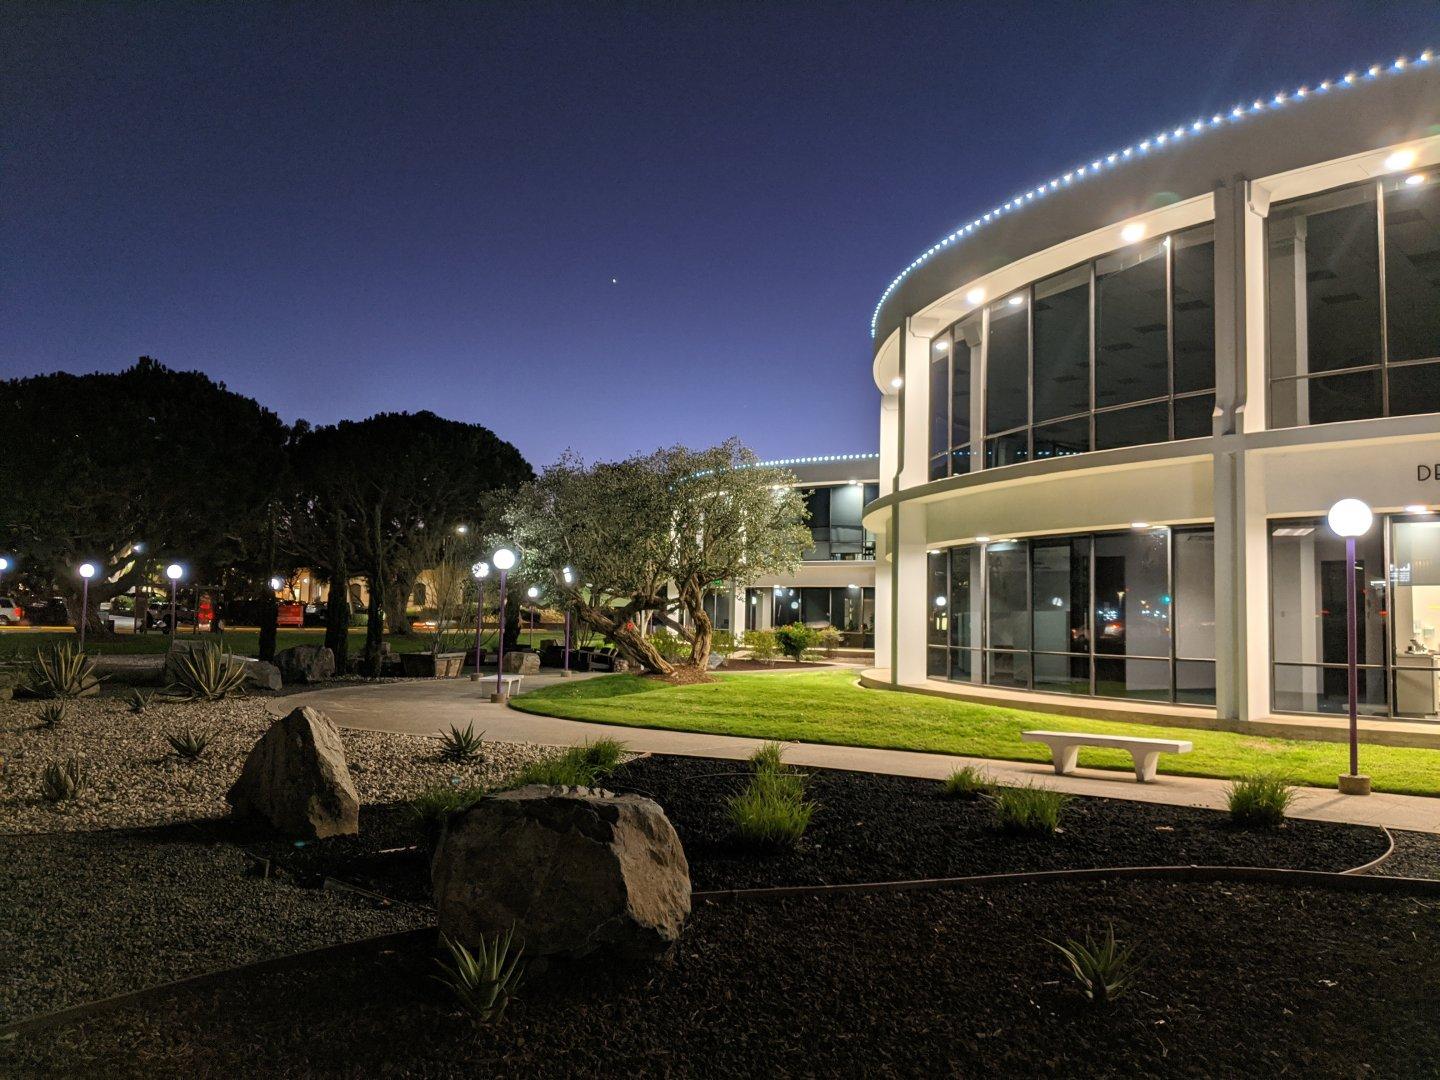 Twilight at the circular offices. There are four of these round buildings arranged in an arc around a central, taller building that's out of view. The rock gardens and drought-tolerant planters used to be lawn and fountains until they redid the landscaping a couple of years ago. #twilight #buildings #city #planter #rockGarden #round #circles